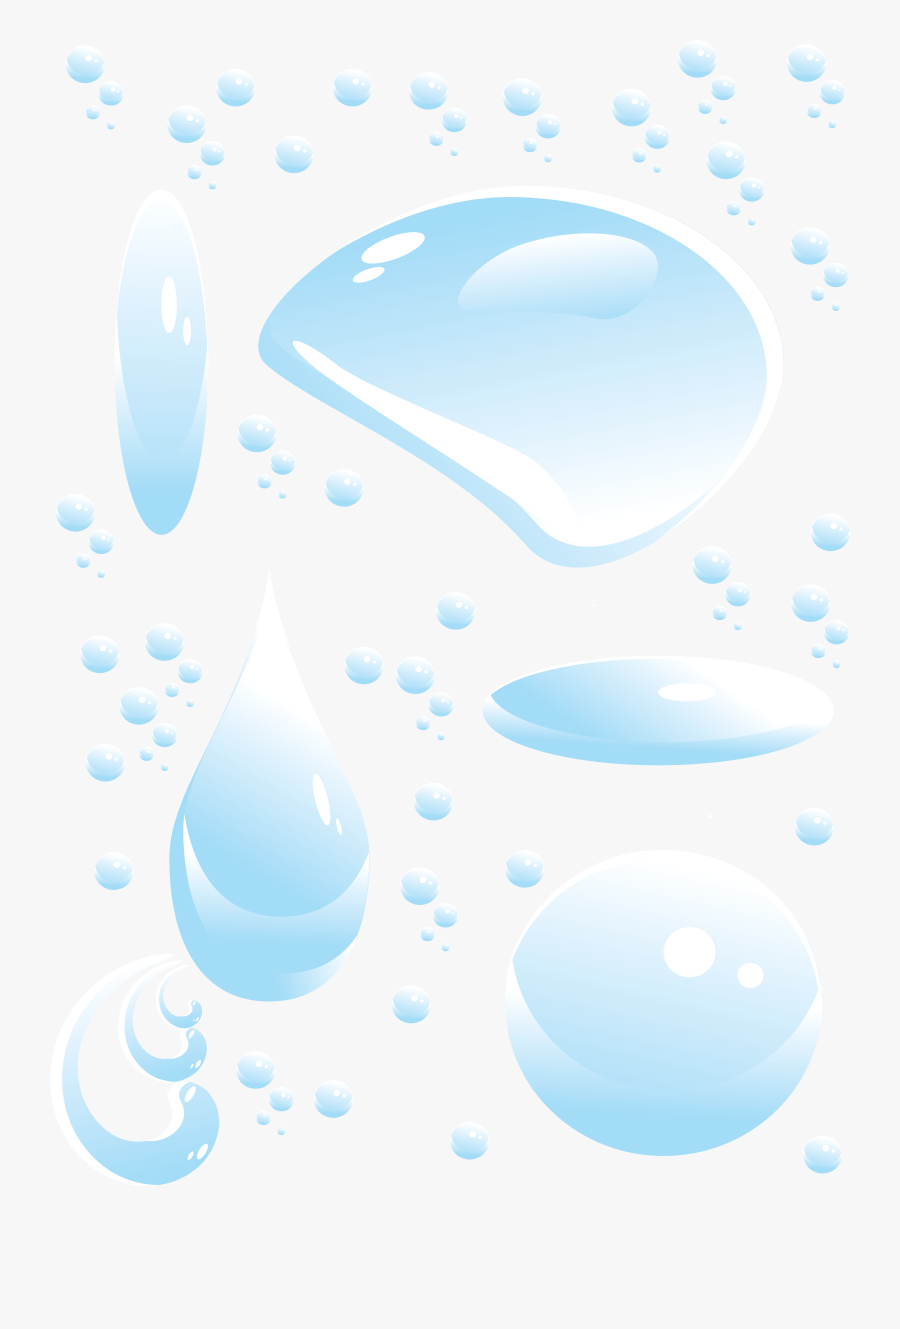 Water Drops Clipart Nal - Portable Network Graphics, Transparent Clipart